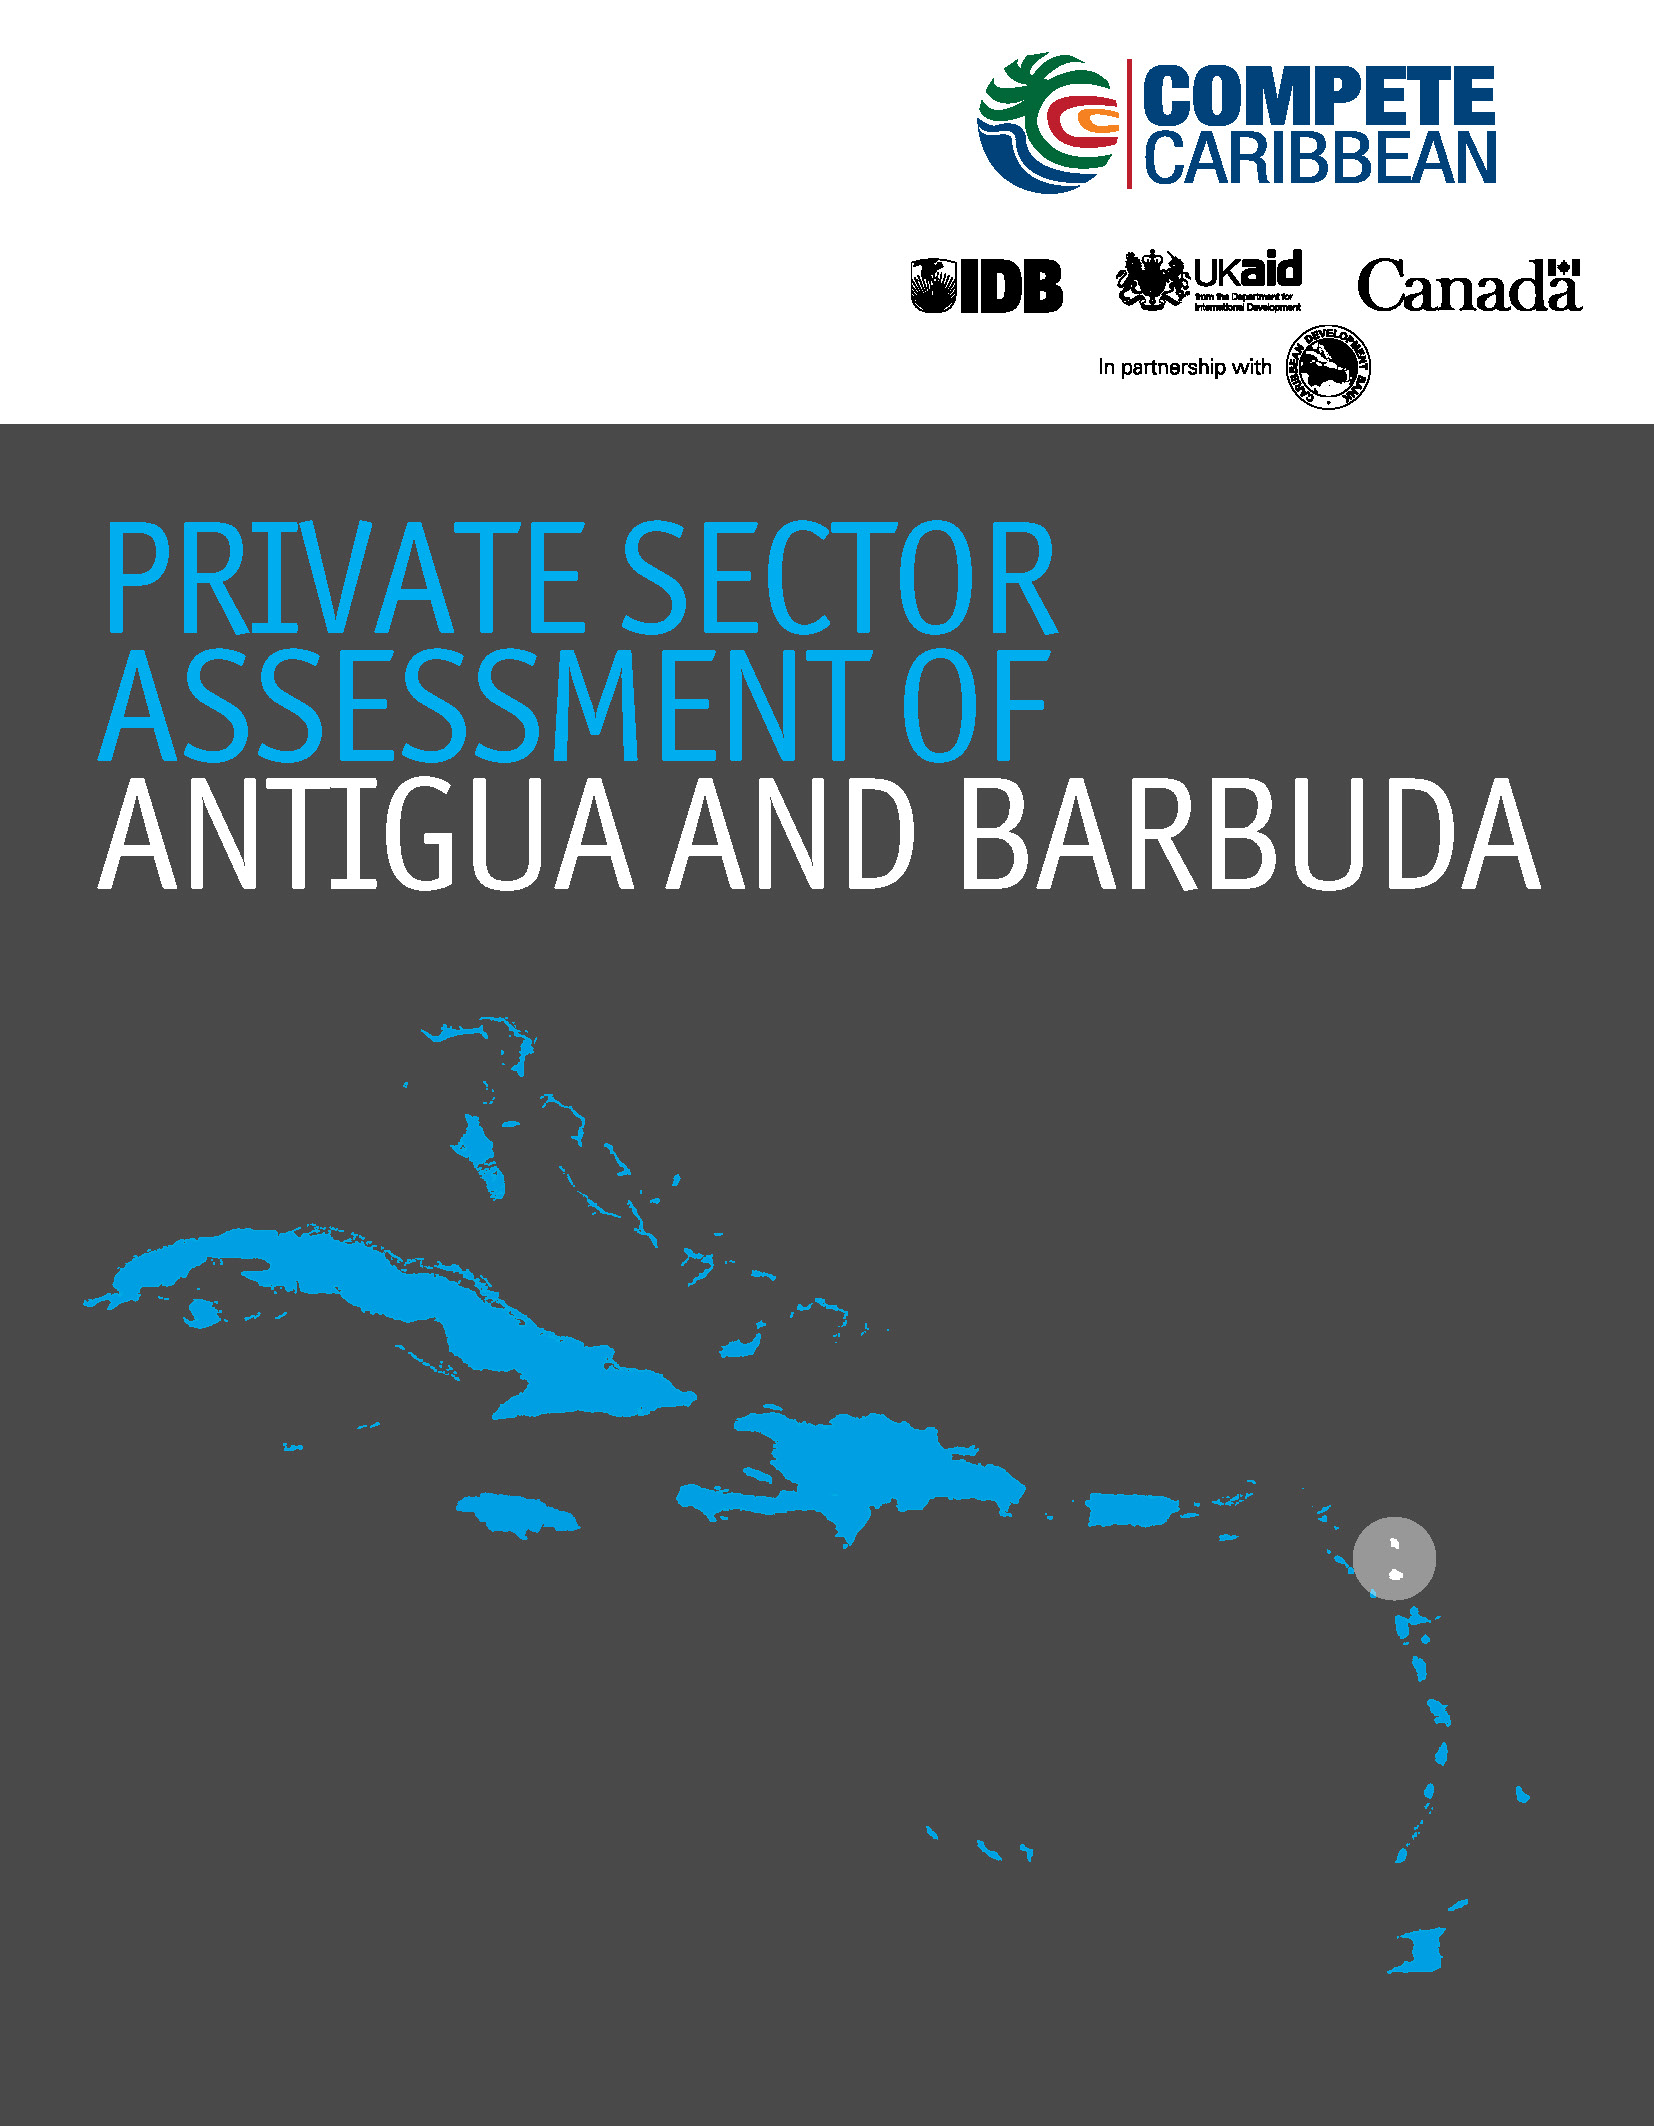 cover showing island chain with Antigua and Barbuda highlighted